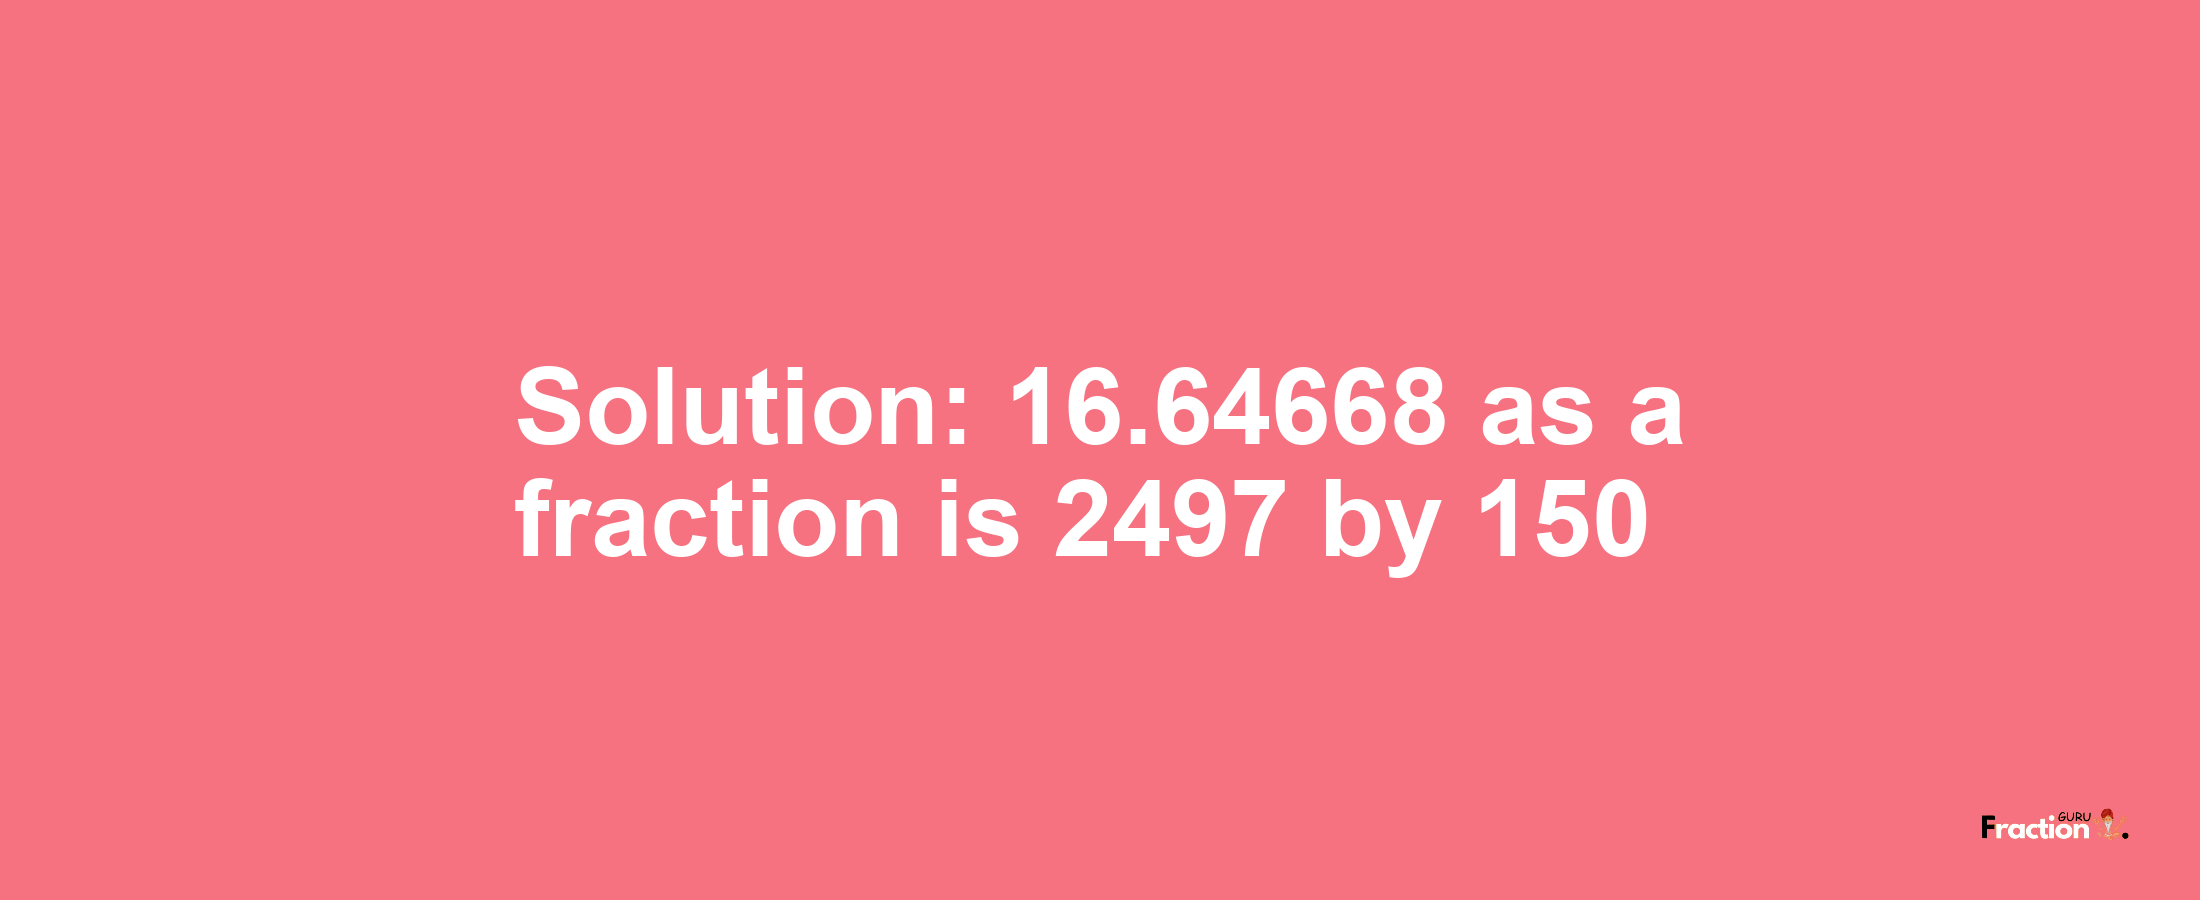 Solution:16.64668 as a fraction is 2497/150